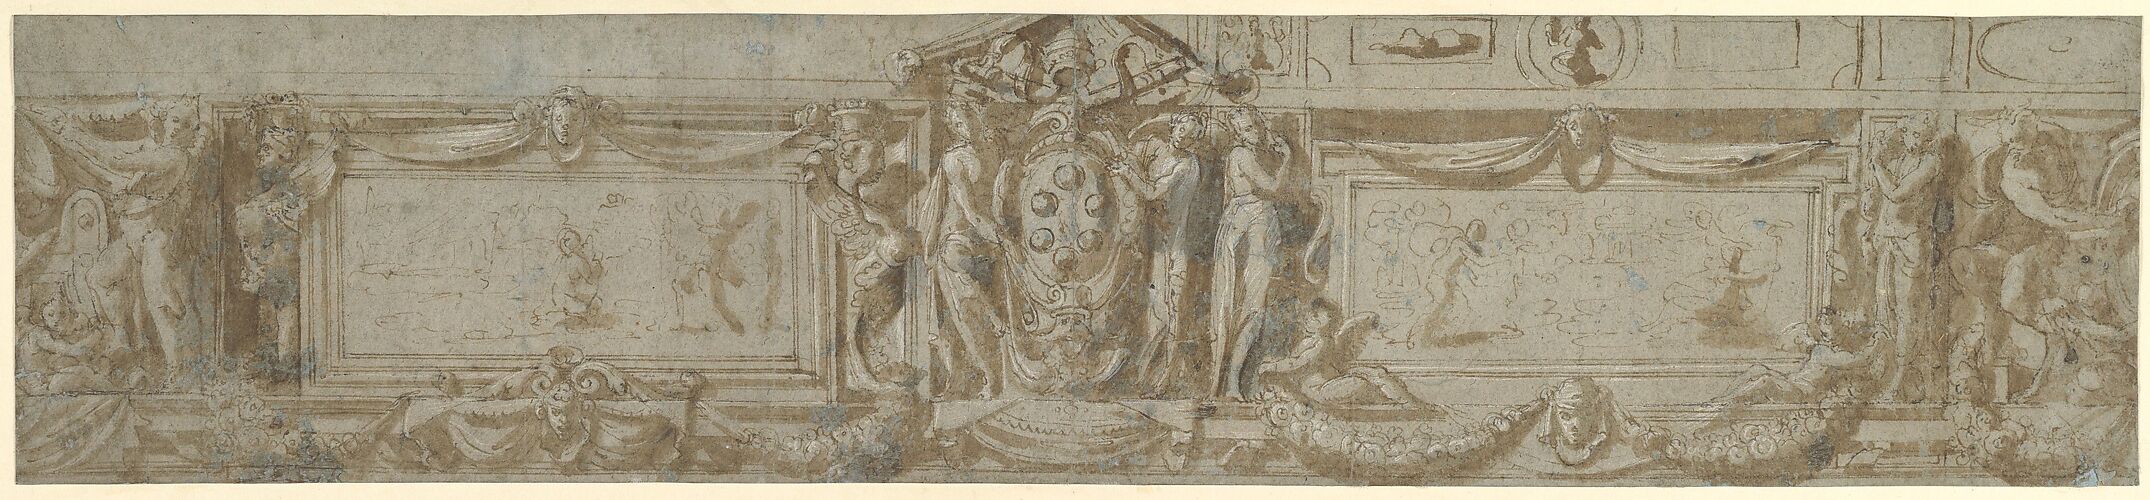 Design for a Frieze with Central Cartouche Containing Medici Arms with Papal Tiara